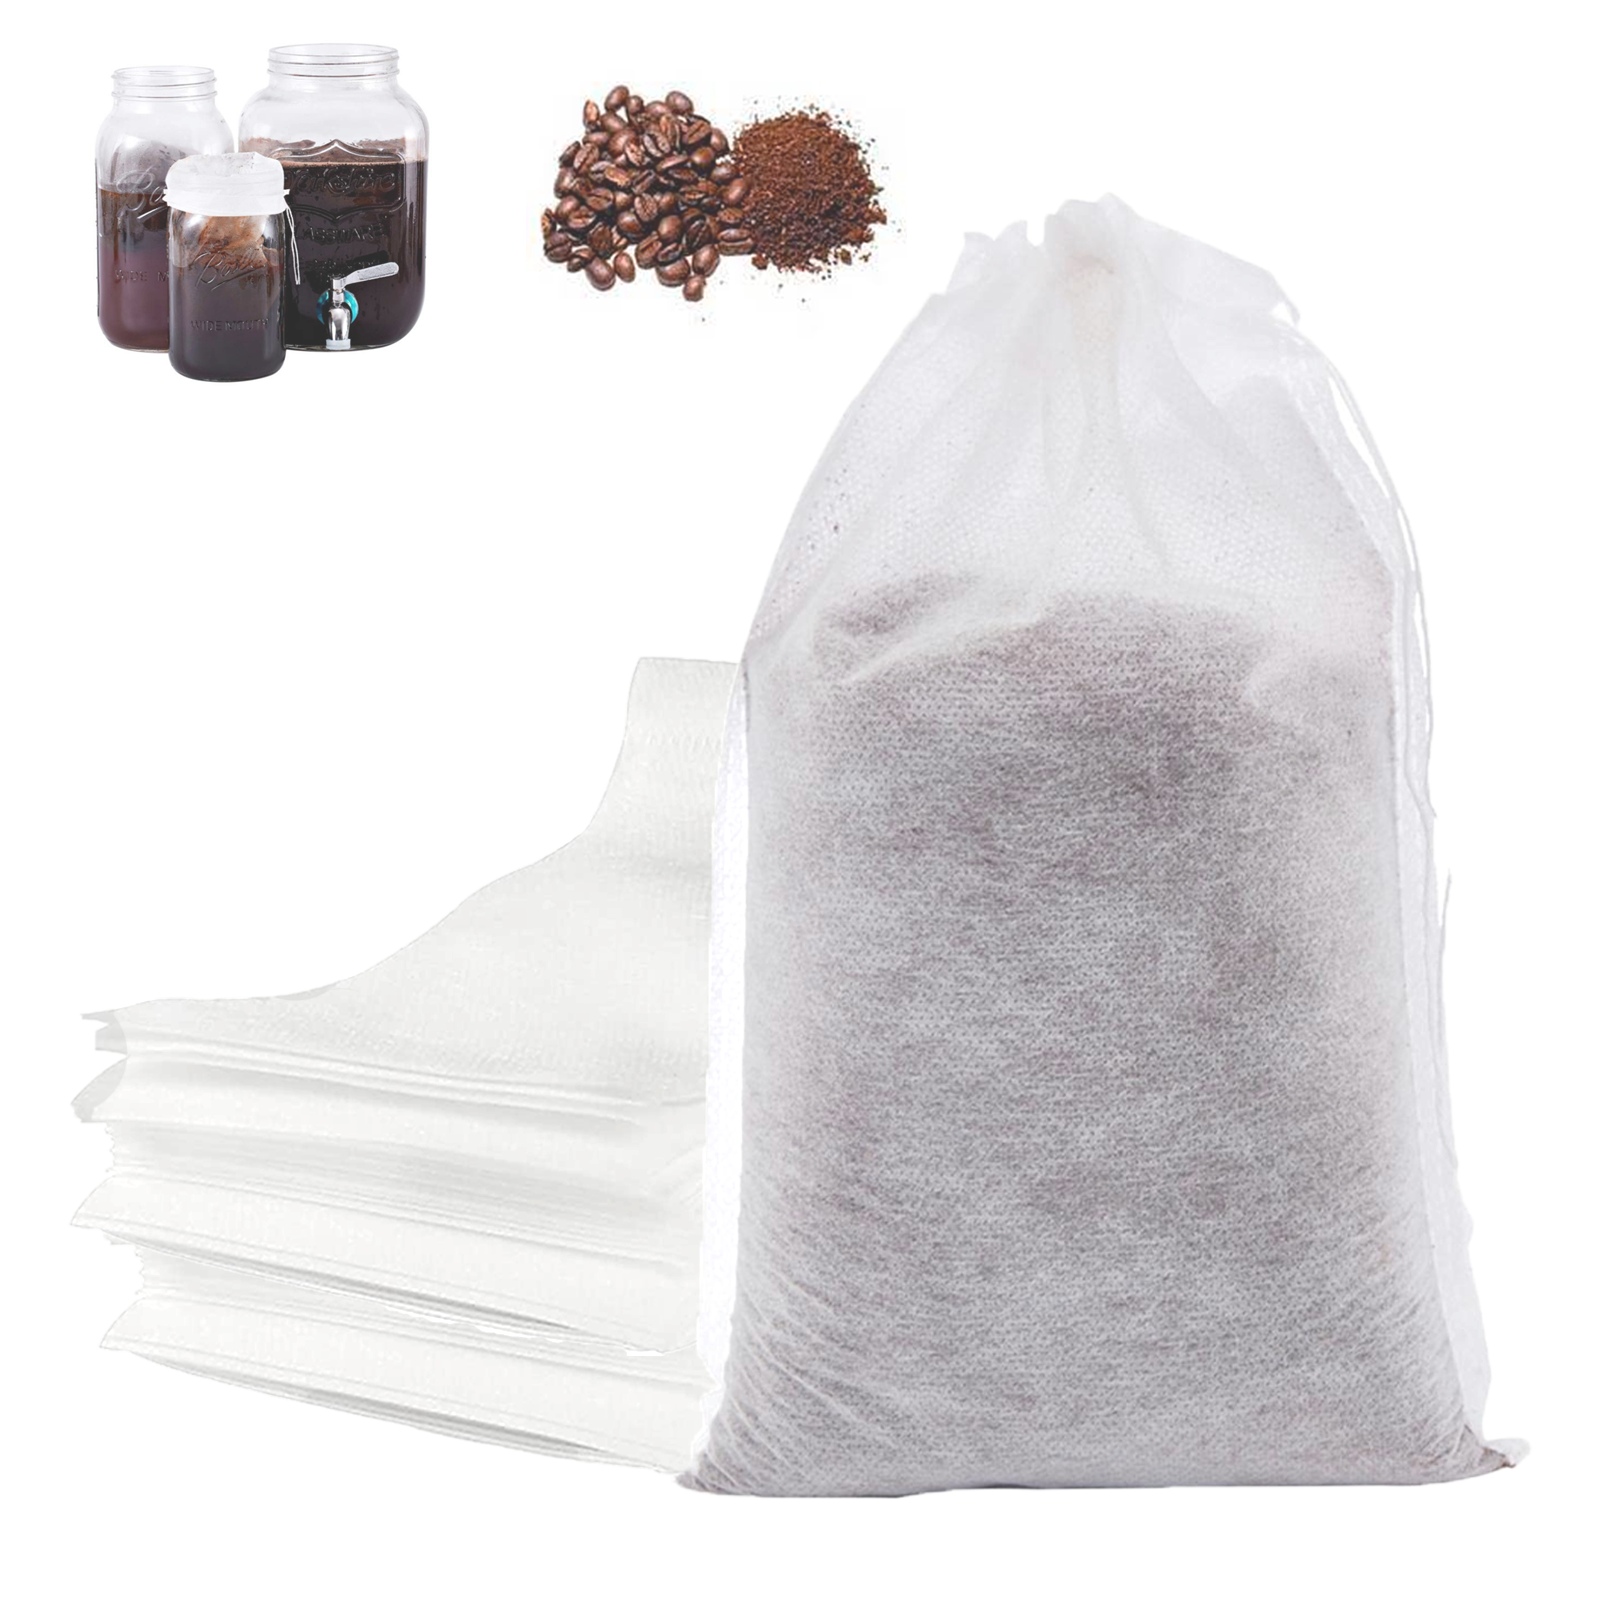 illy Cold Brew Filter Pack Bags 1/2 Gallon - 20/Case